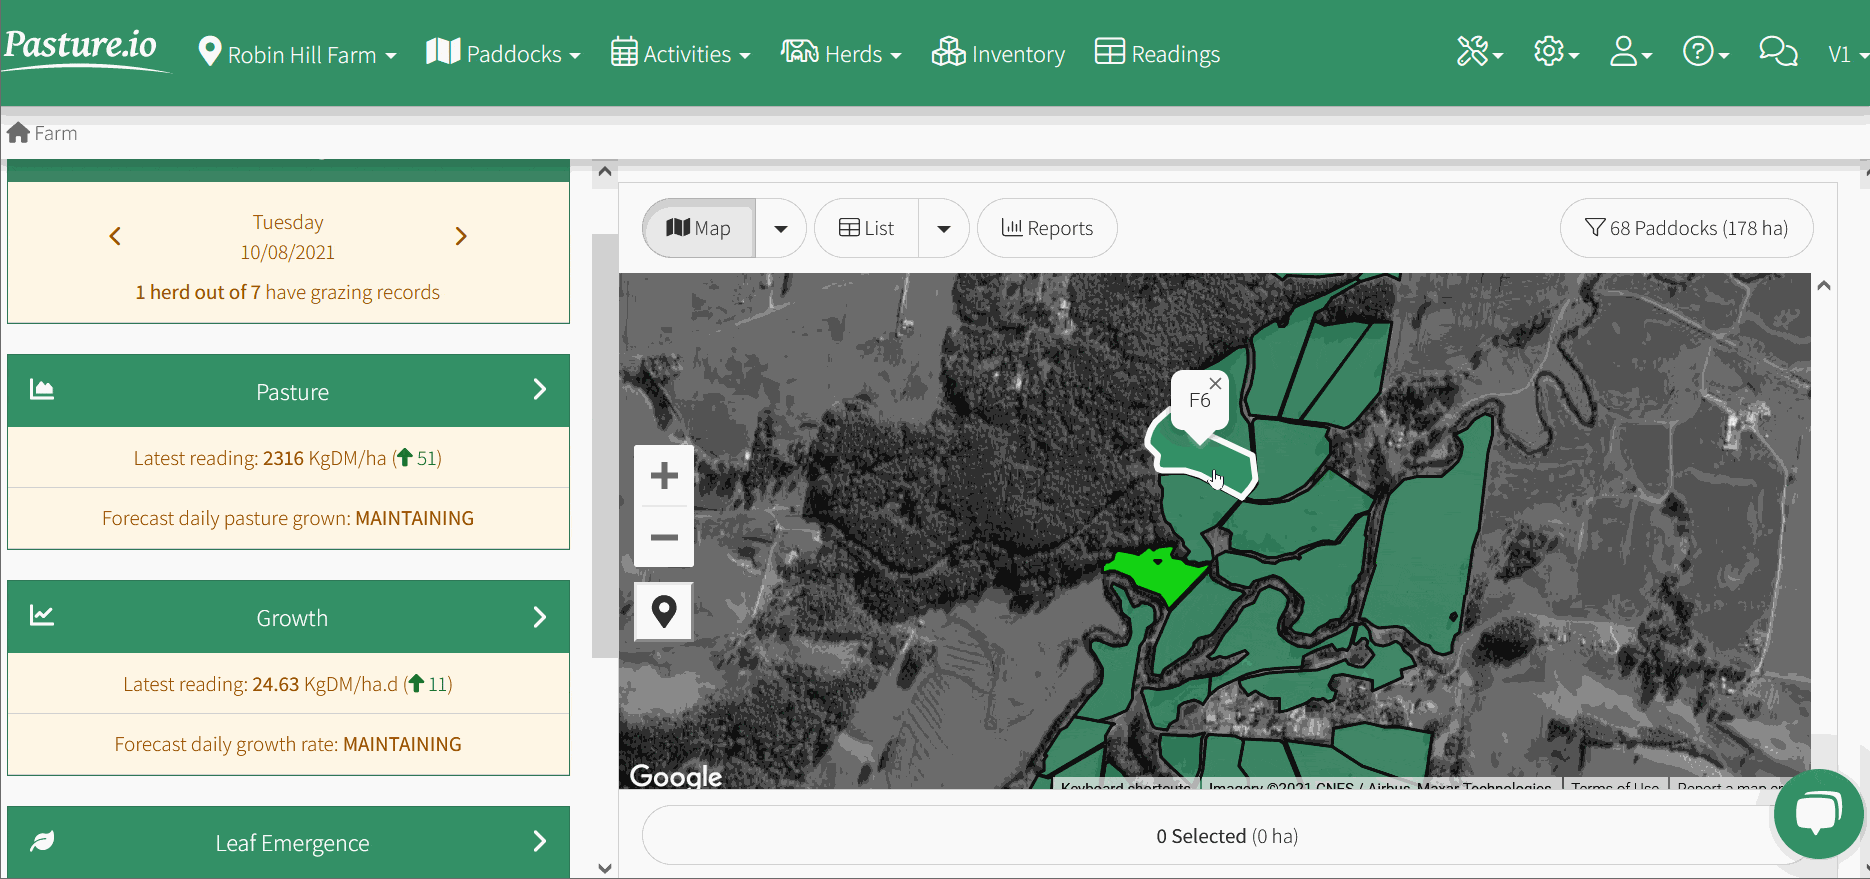 In Pasture.io (farm app), you can also select a paddock from your map and enter a grazing record